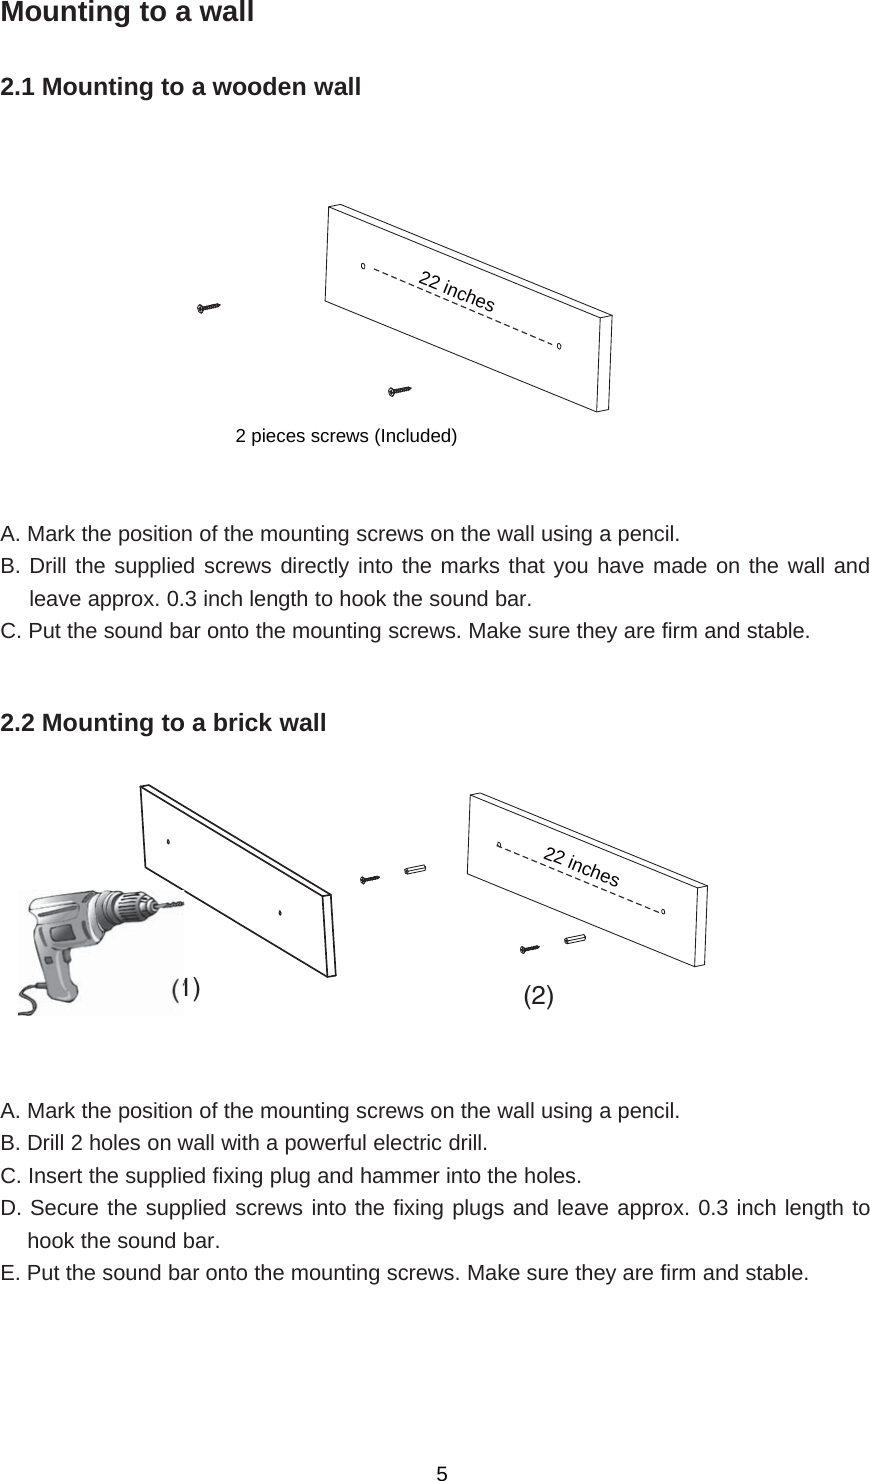 Mounting to a wall2.1 Mounting to a wooden wallA. Mark the position of the mounting screws on the wall using a pencil.B. Drill the supplied screws directly into the marks that you have made on the wall andleave approx. 0.3 inch length to hook the sound bar.C. Put the sound bar onto the mounting screws. Make sure they are firm and stable.2.2 Mounting to a brick wallA. Mark the position of the mounting screws on the wall using a pencil.B. Drill 2 holes on wall with a powerful electric drill.C. Insert the supplied fixing plug and hammer into the holes.D. Secure the supplied screws into the fixing plugs and leave approx. 0.3 inch length tohook the sound bar.E. Put the sound bar onto the mounting screws. Make sure they are firm and stable.5(1) (2)22 inches2 pieces screws (Included)22 inches